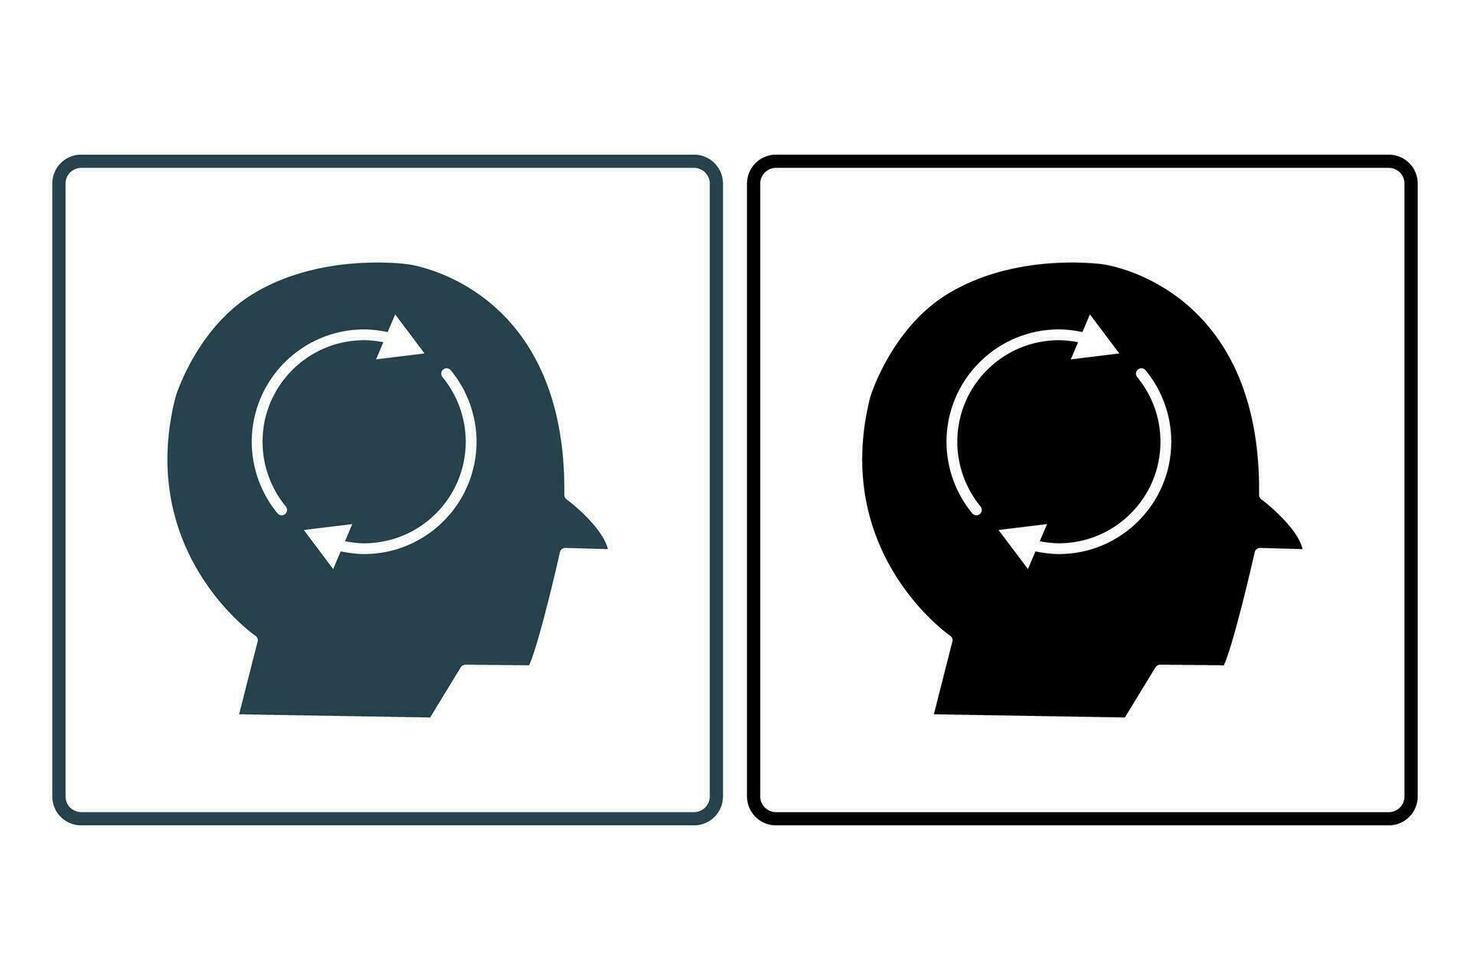 mind refresh icon. icon related to mental health, meditation, wellness. solid icon style. simple vector design editable